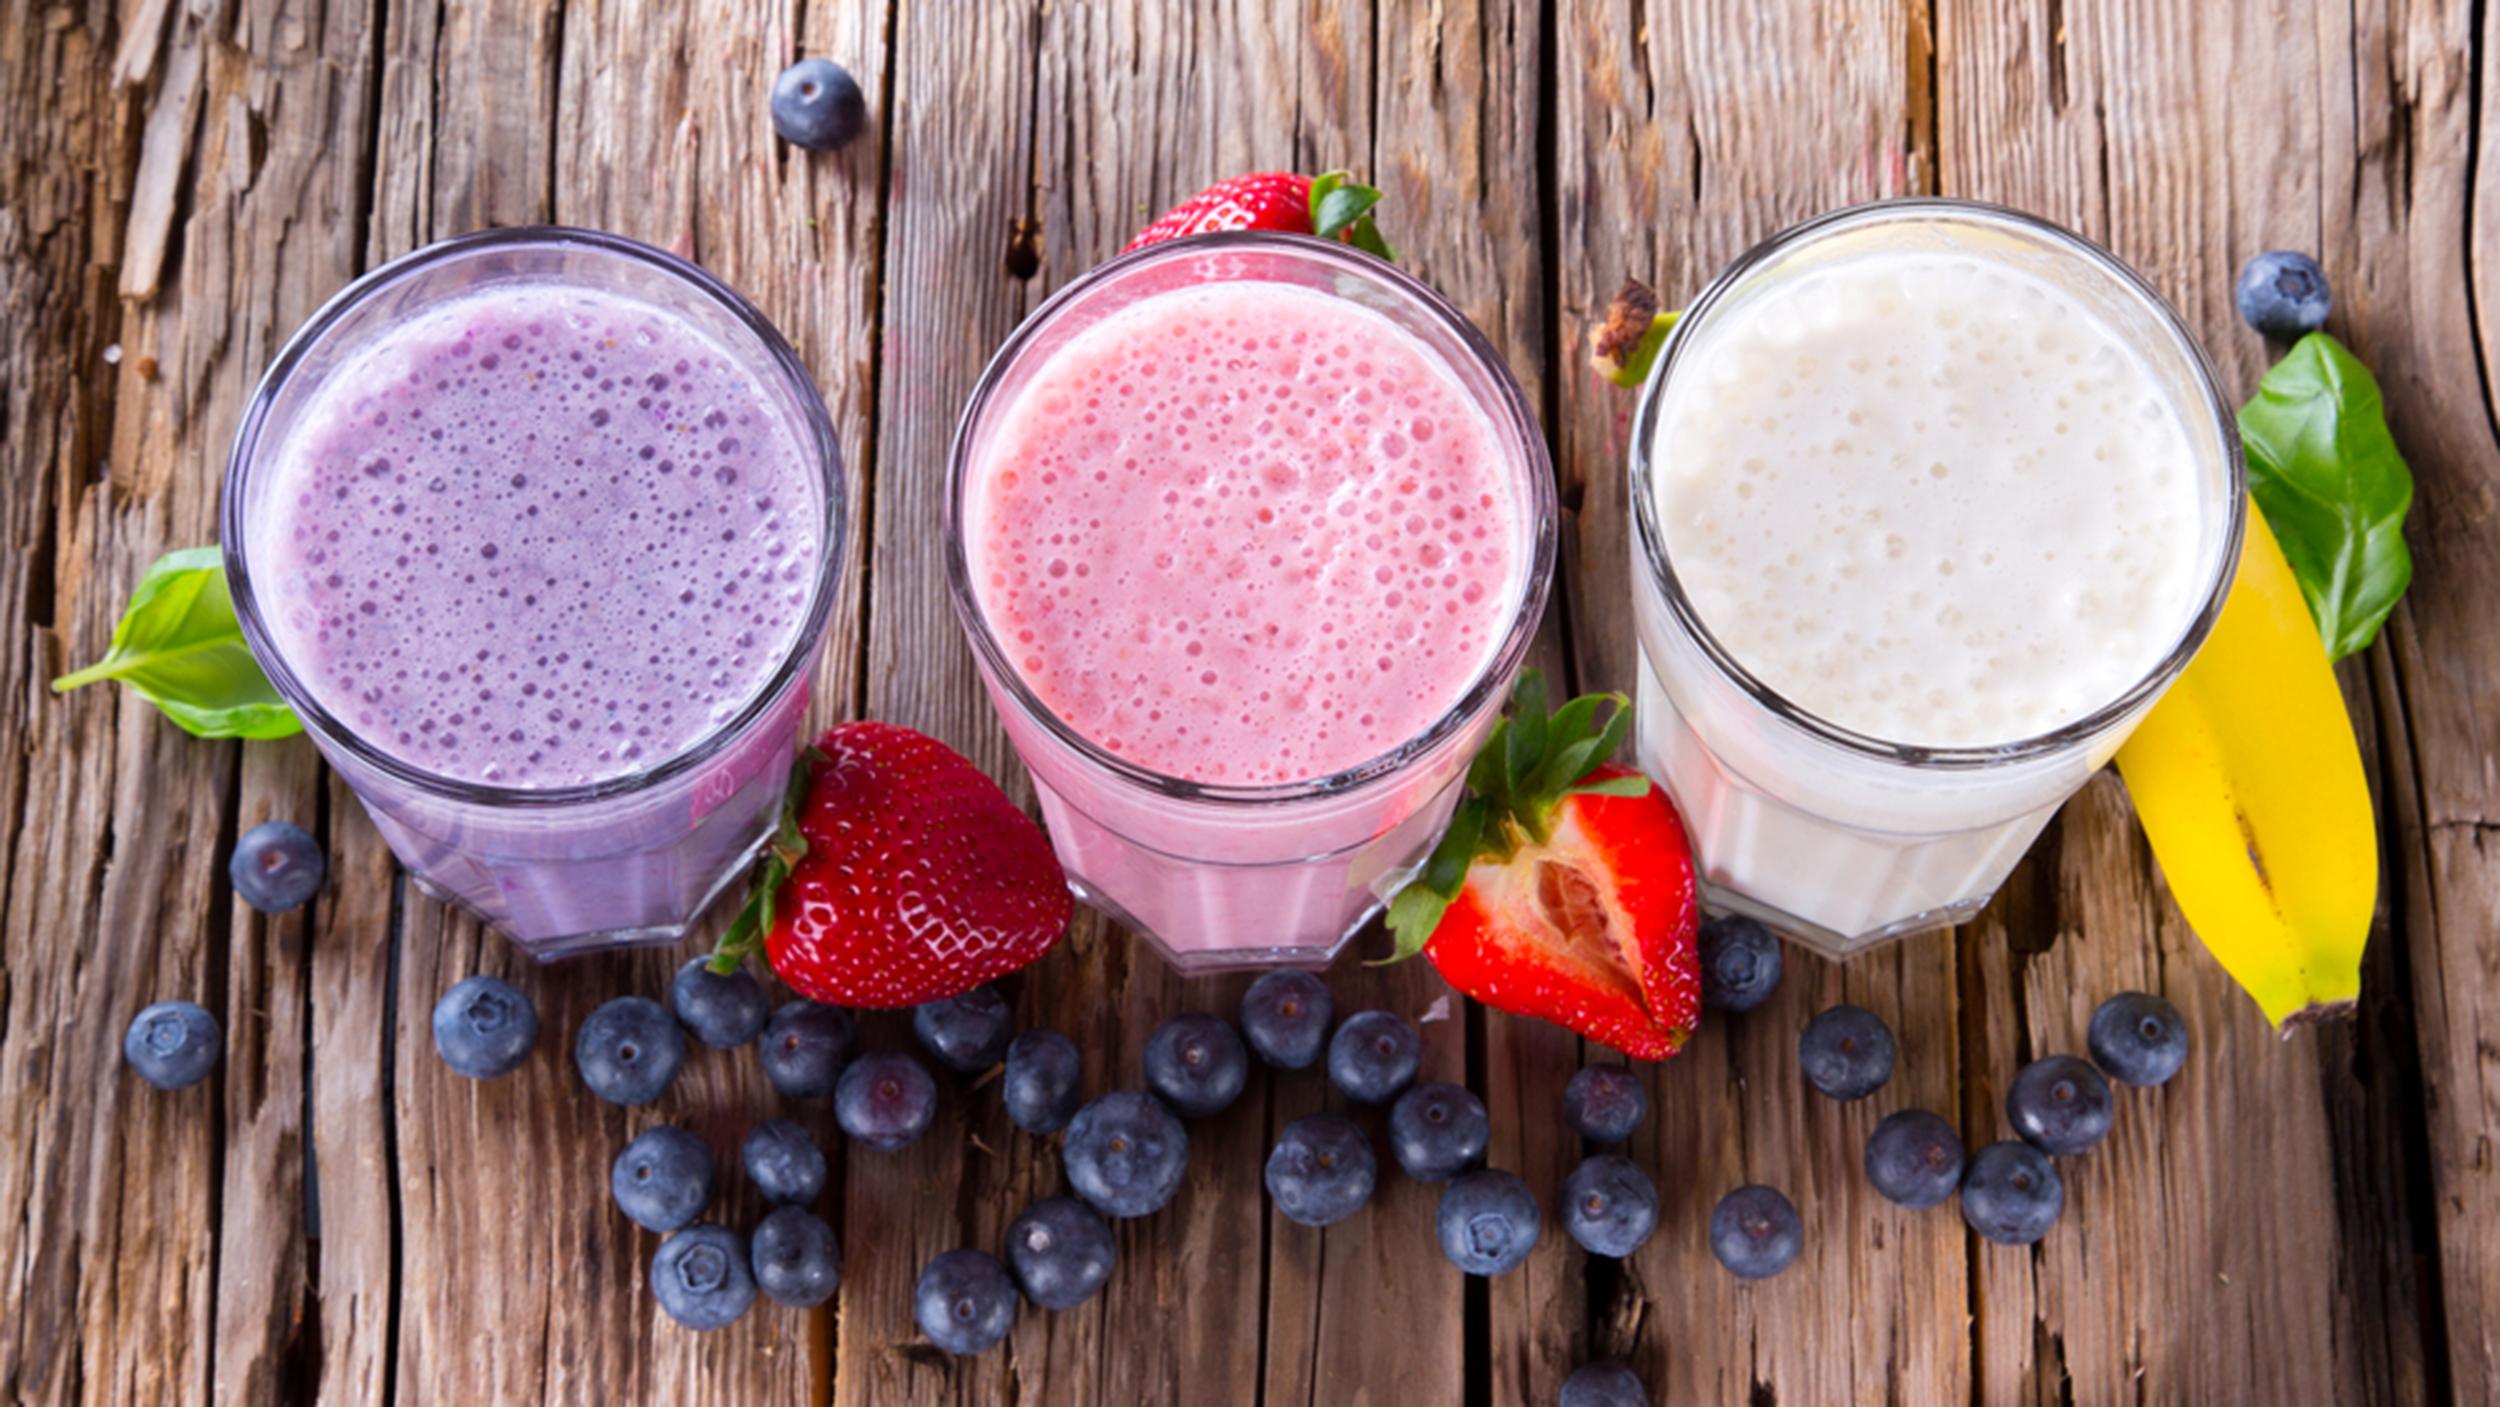 Fresh milk, strawberry, blueberry and banana drinks on wodeen table, assorted protein cocktails with fresh fruits. ; Shutterstock ID 182683421; PO: Brandon for Food